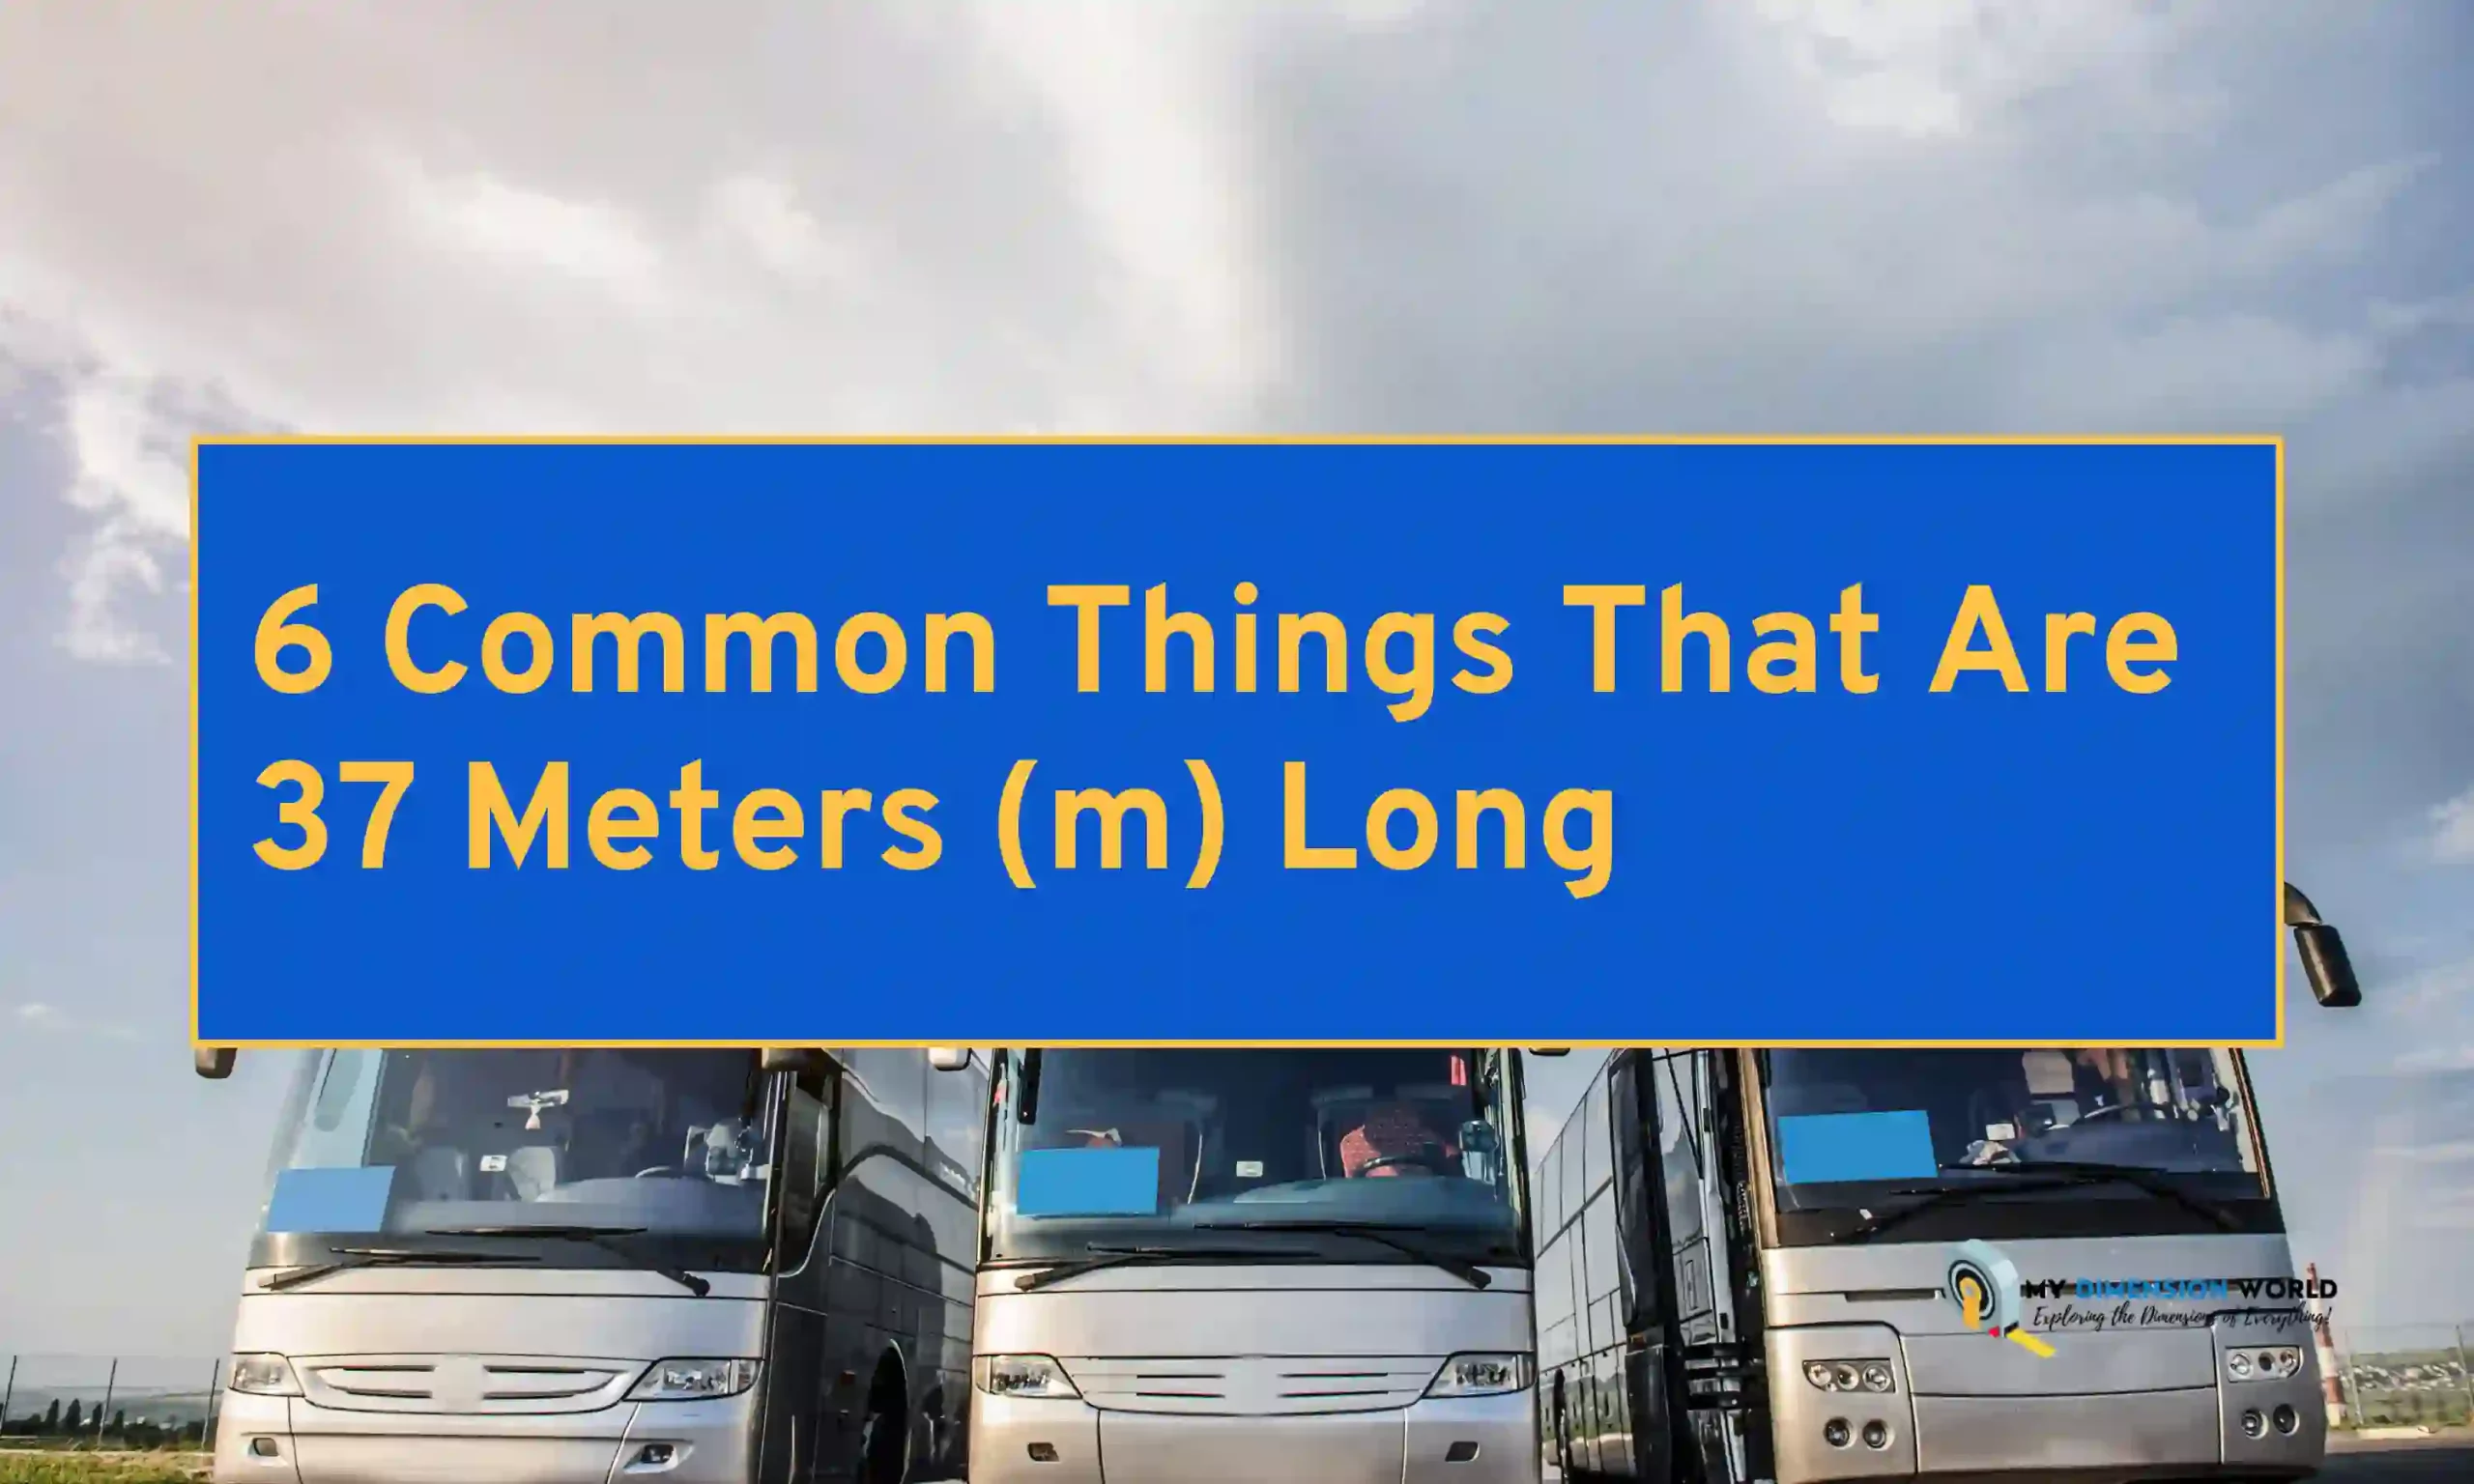 6 Common Things That Are 37 Meters (m) Long